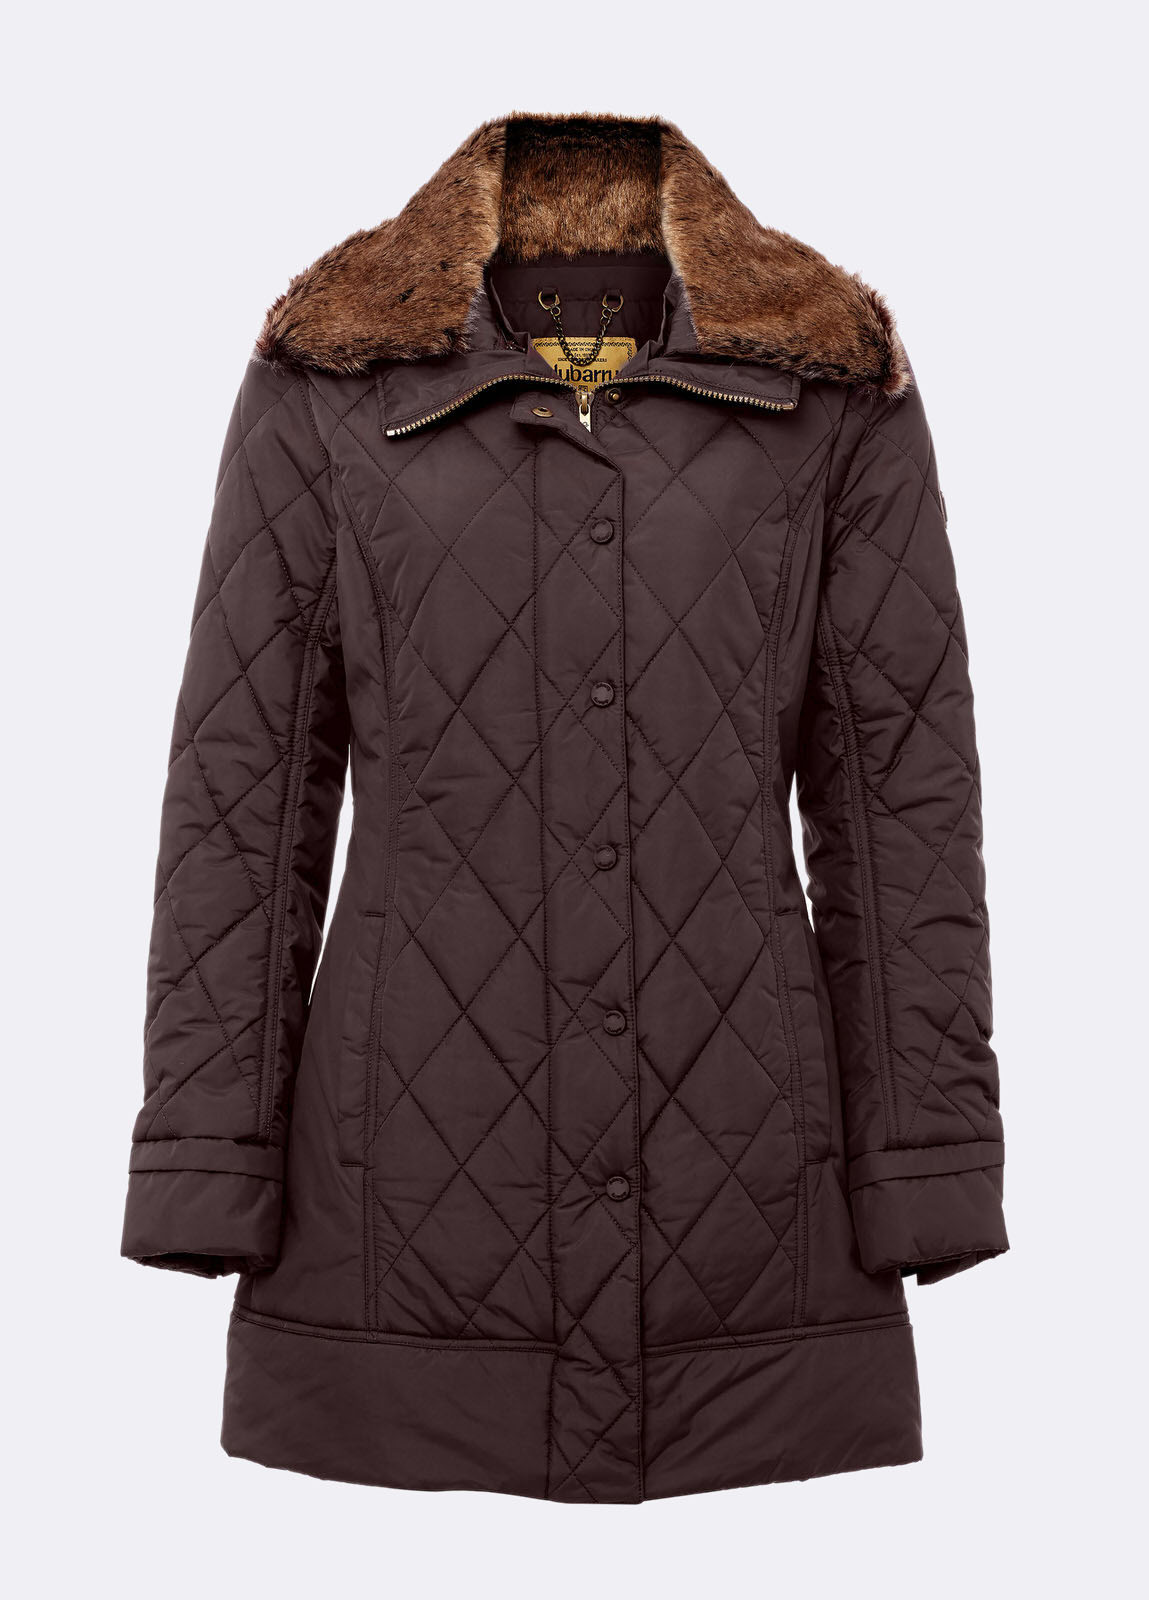 Kenmare Quilted Coat - Coffee Bean